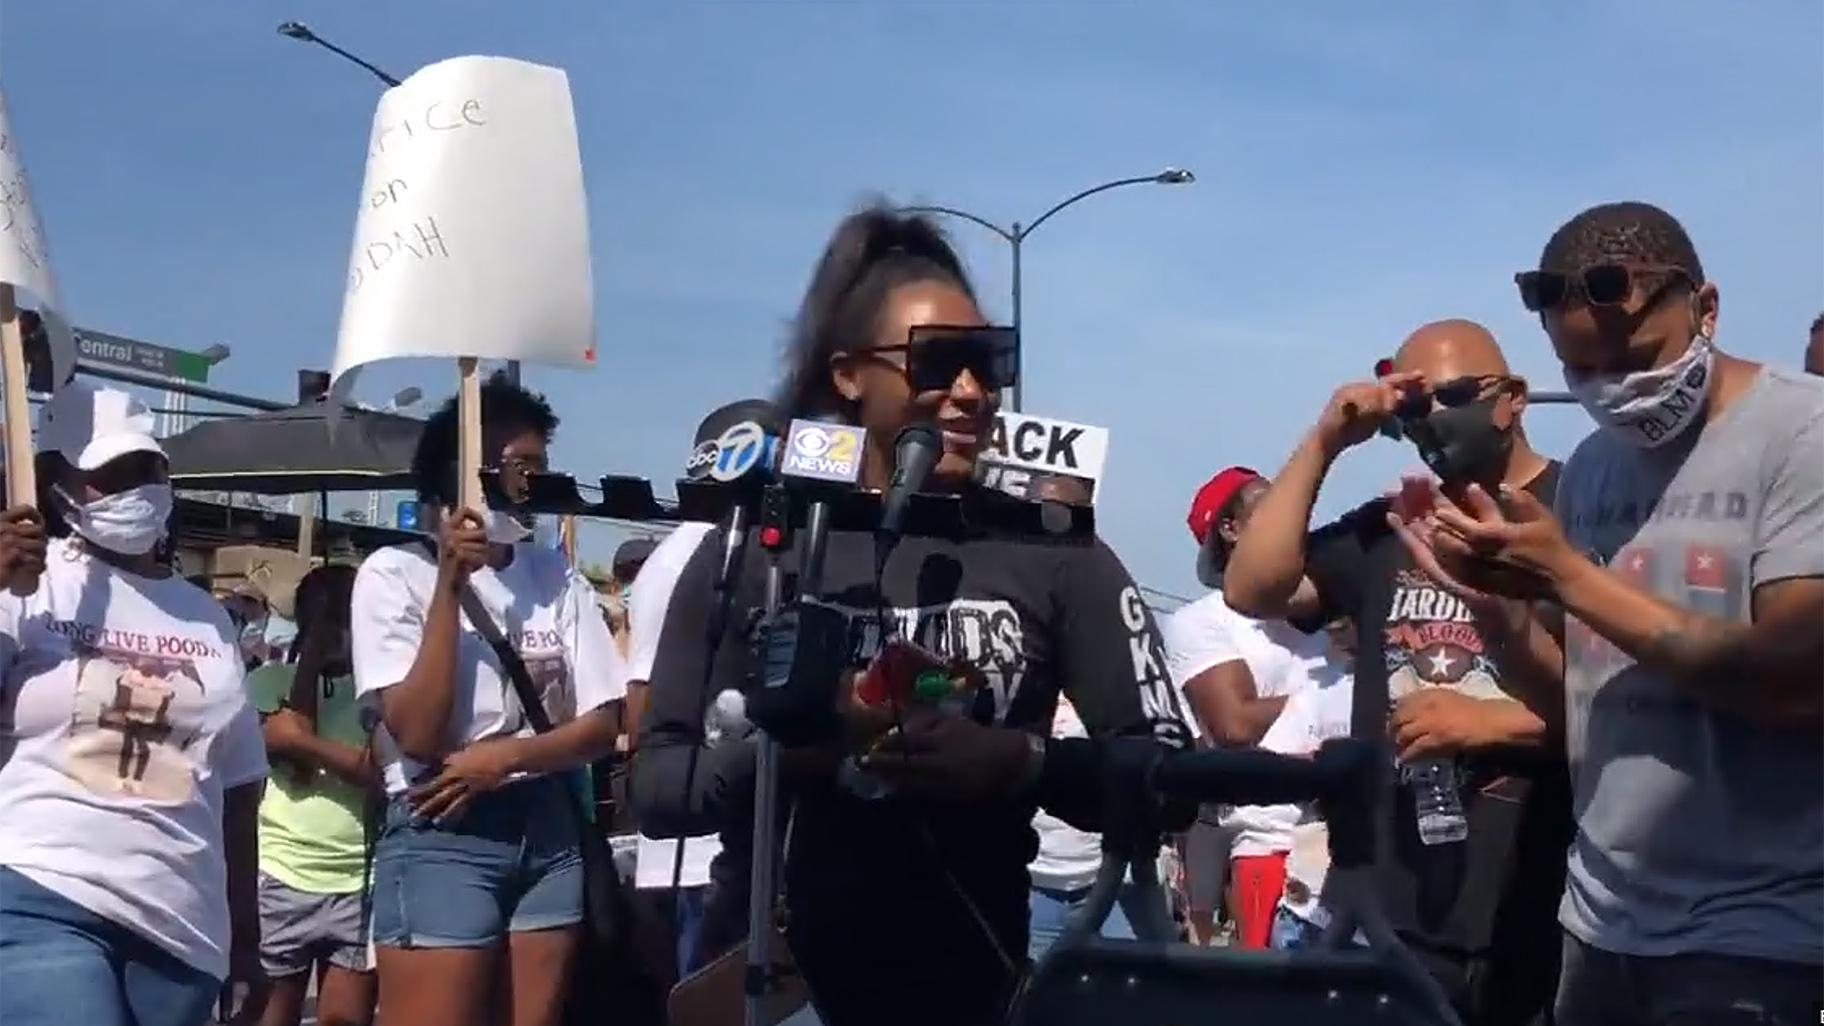 Miracle Boyd of GoodKids Mad City speaks at the “Love March” event on Saturday, July 25, 2020. (WTTW News)